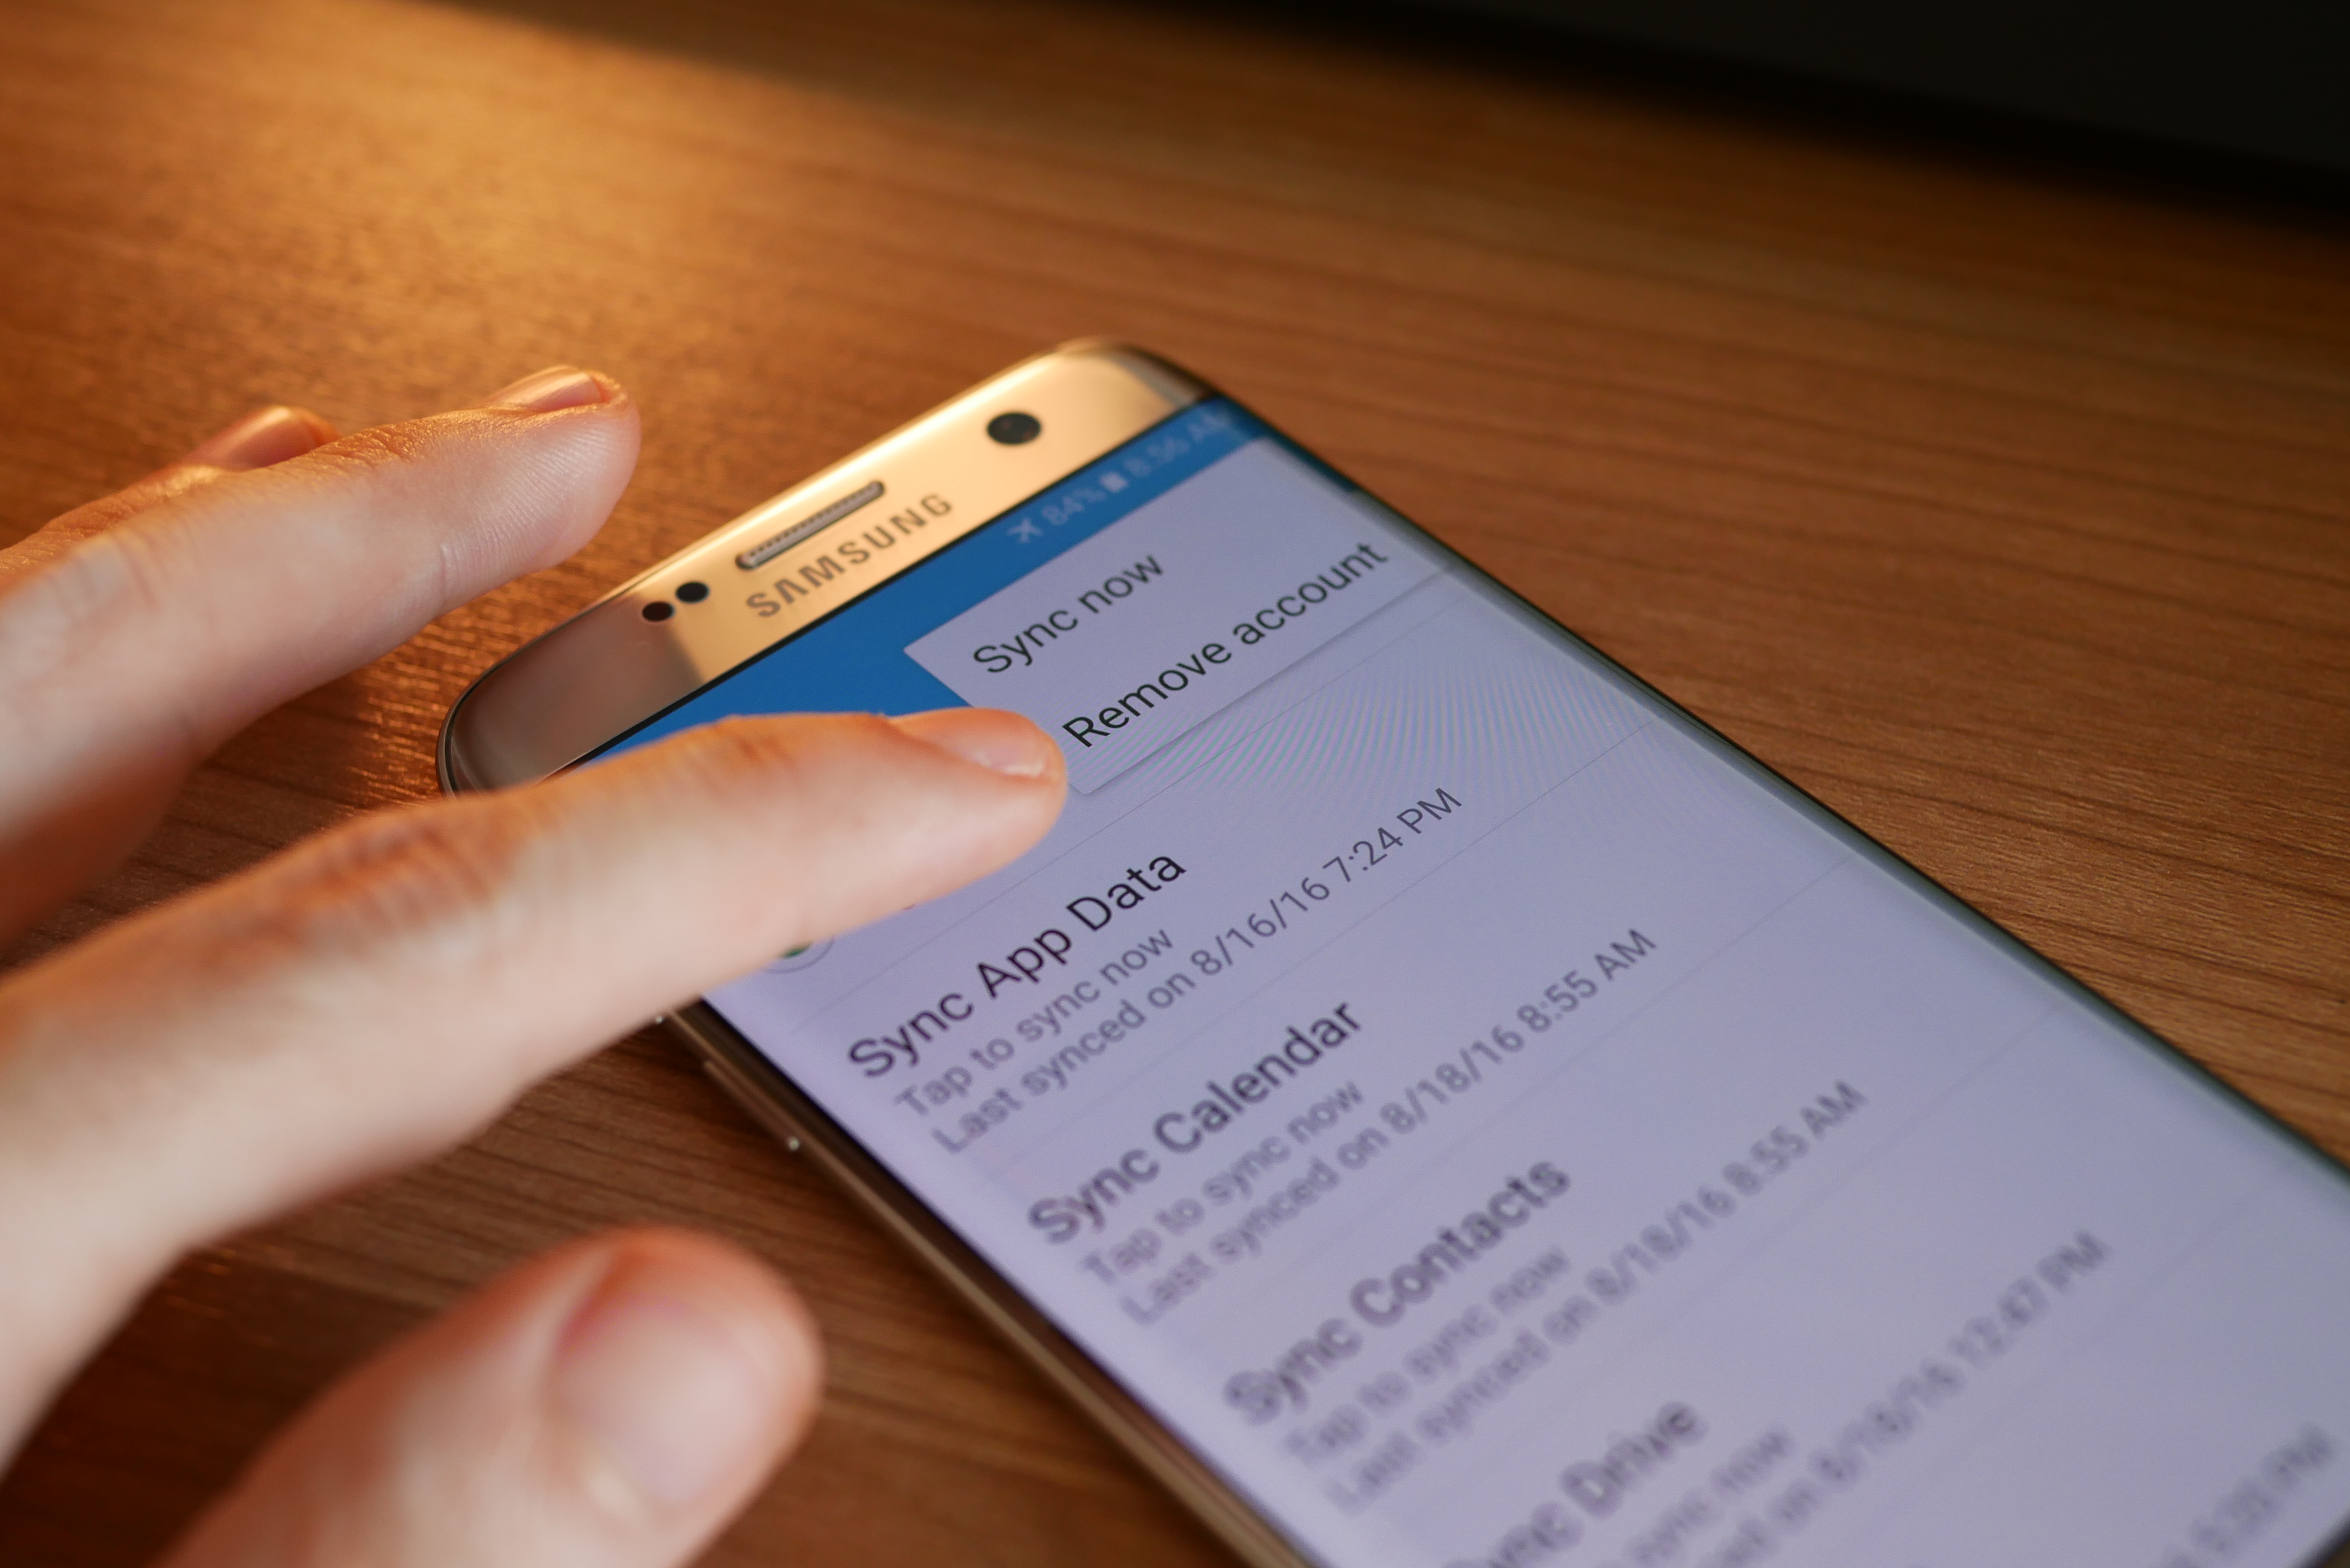 how to reset a galaxy s7 edge settings remove account